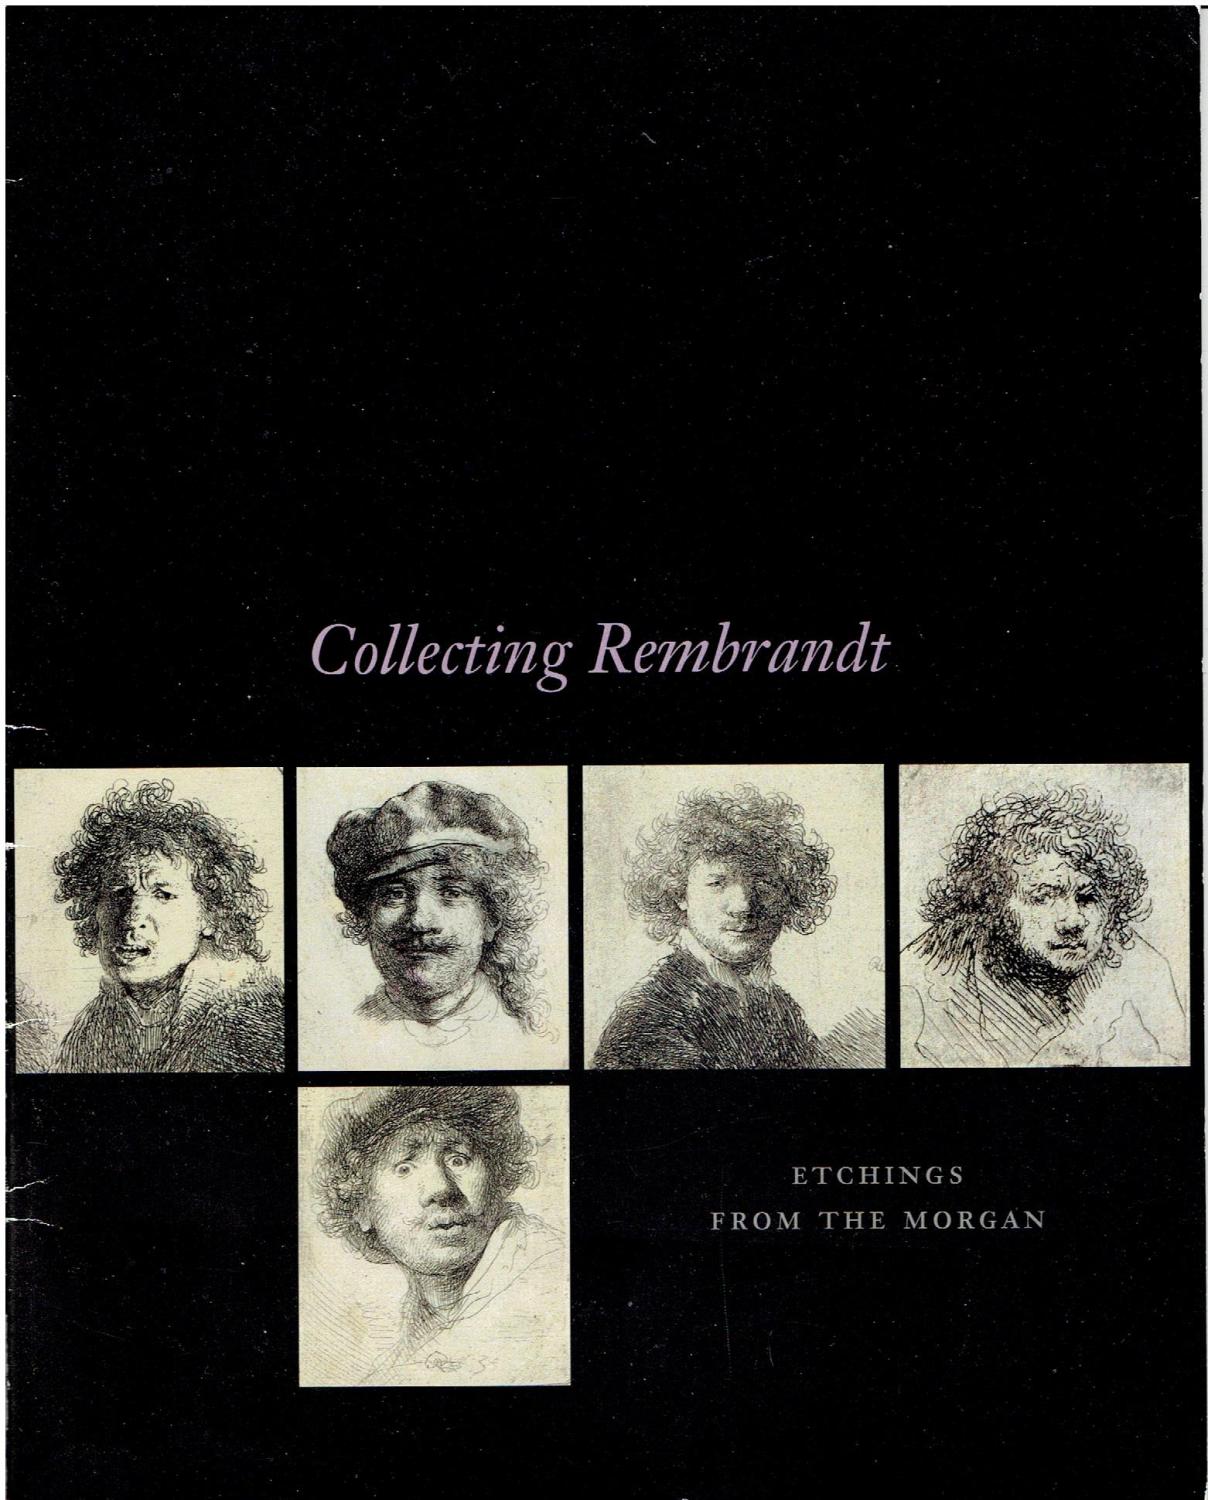 Collecting Rembrandt - Etchings from the Morgan - Anne Varick Lauder